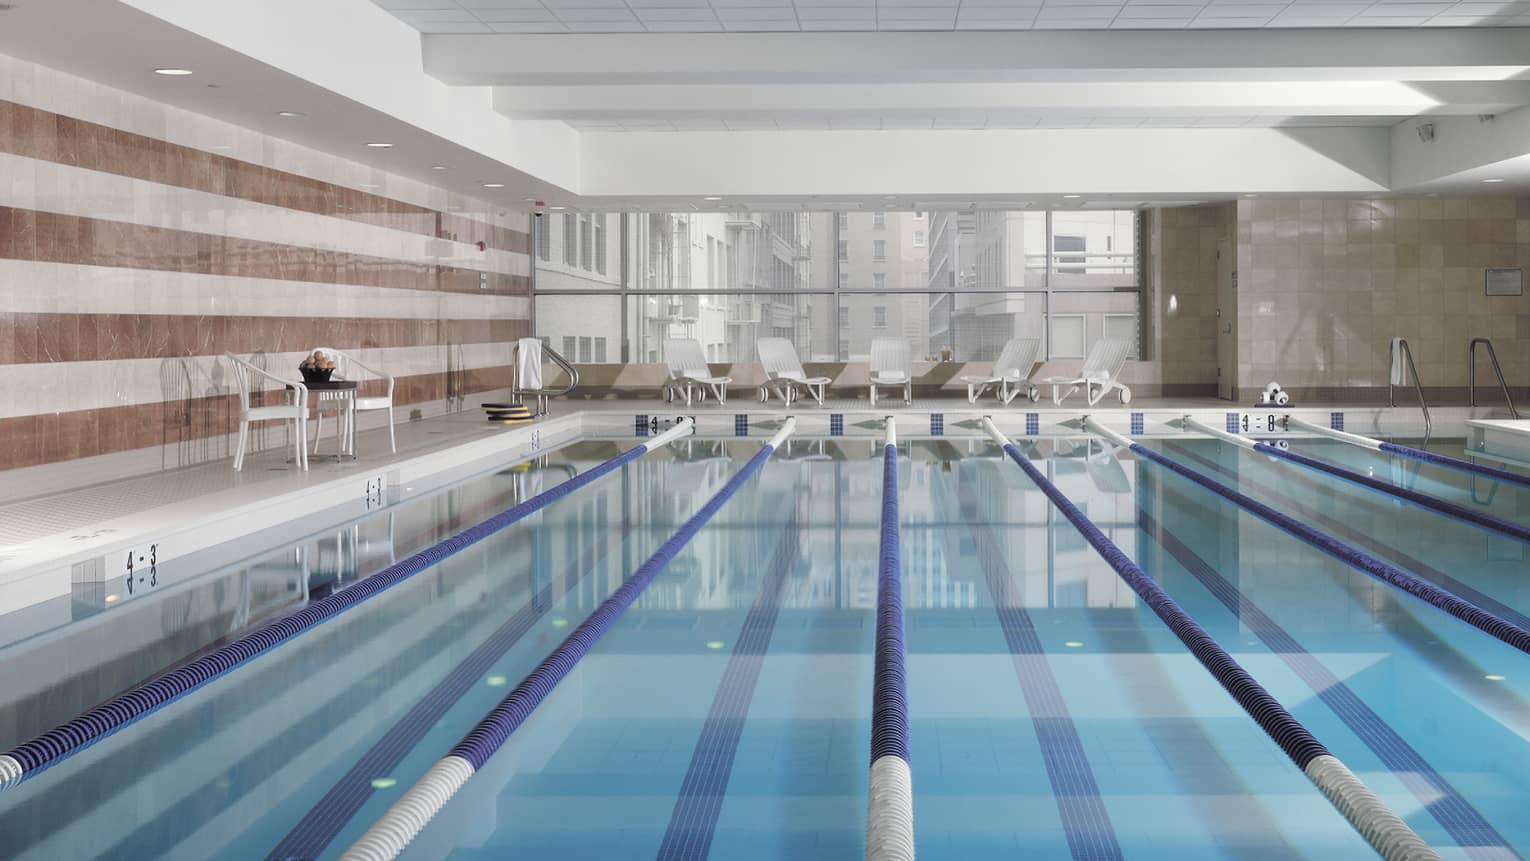 View across indoor swimming pool with divided lanes 